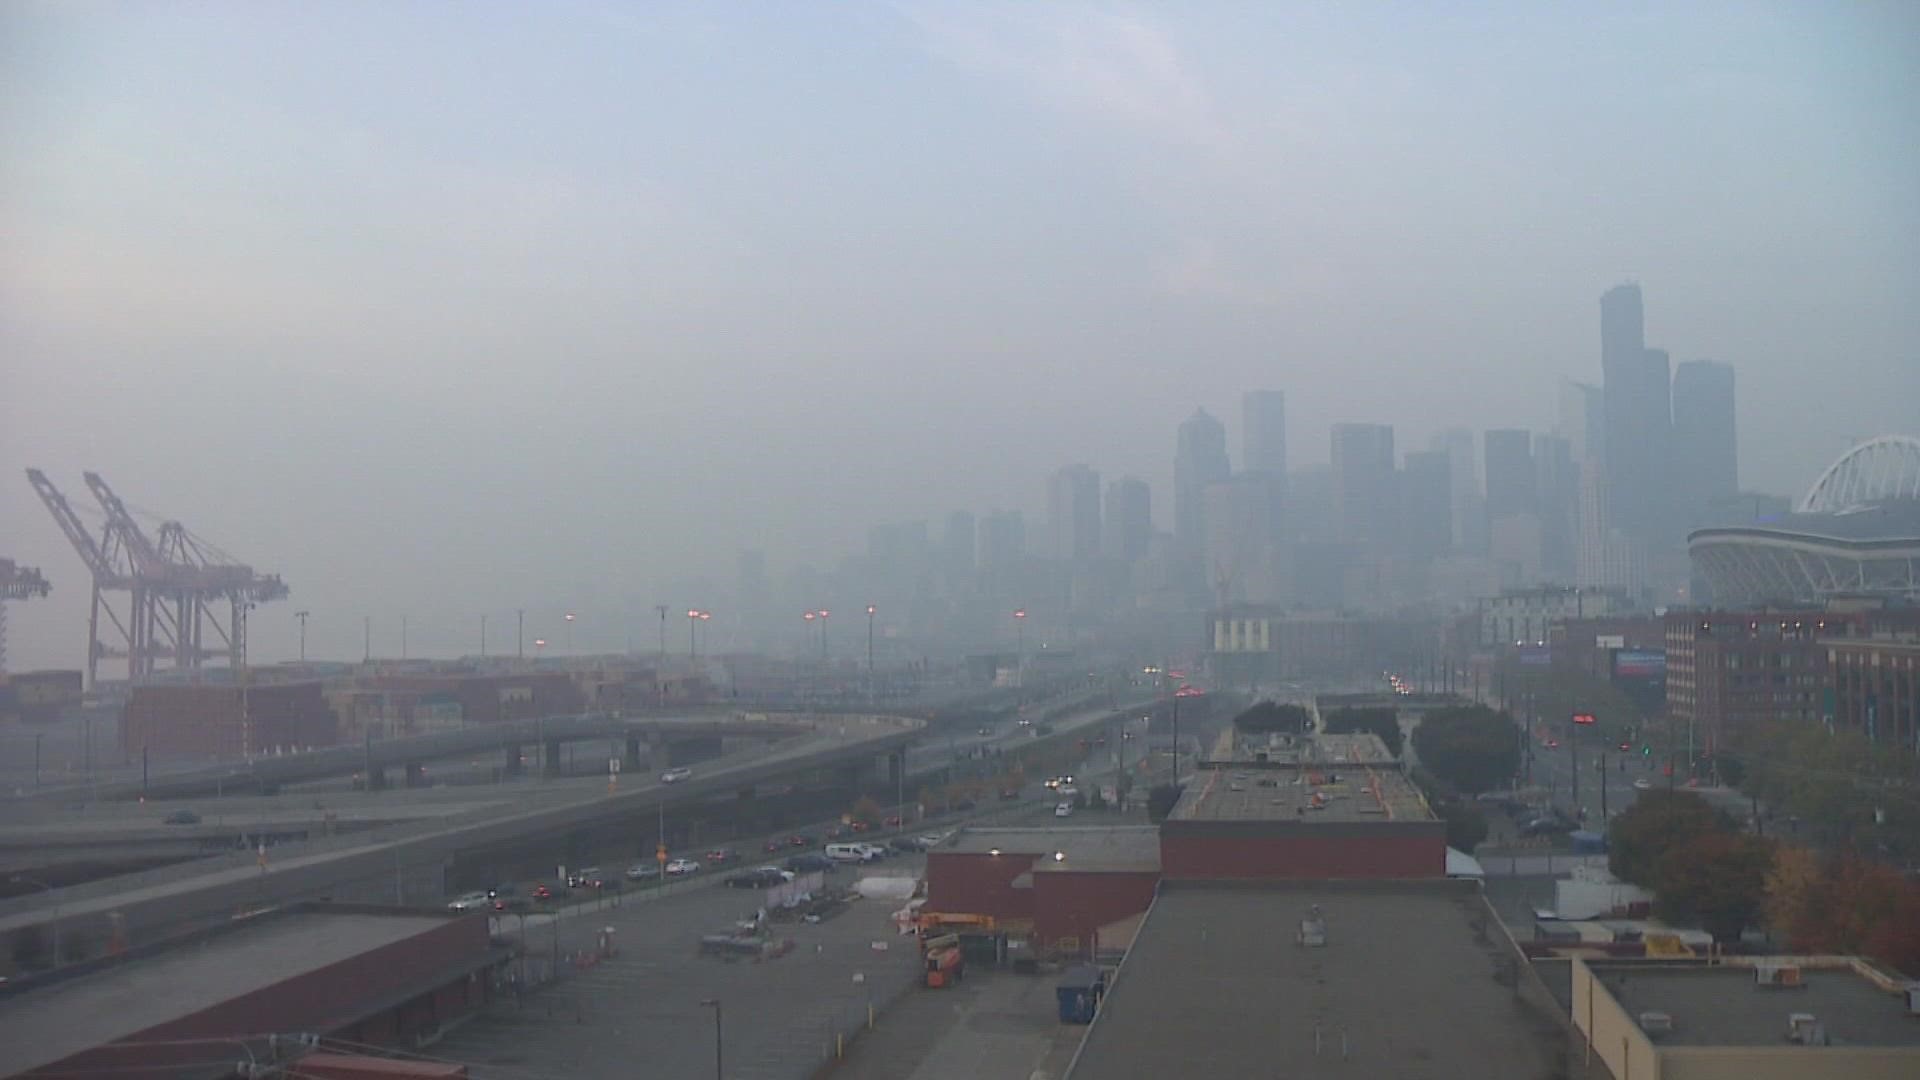 For the second day in a row, the Seattle area had the worst air quality on planet Earth. Upcoming rain should clear some of the haze out this weekend.